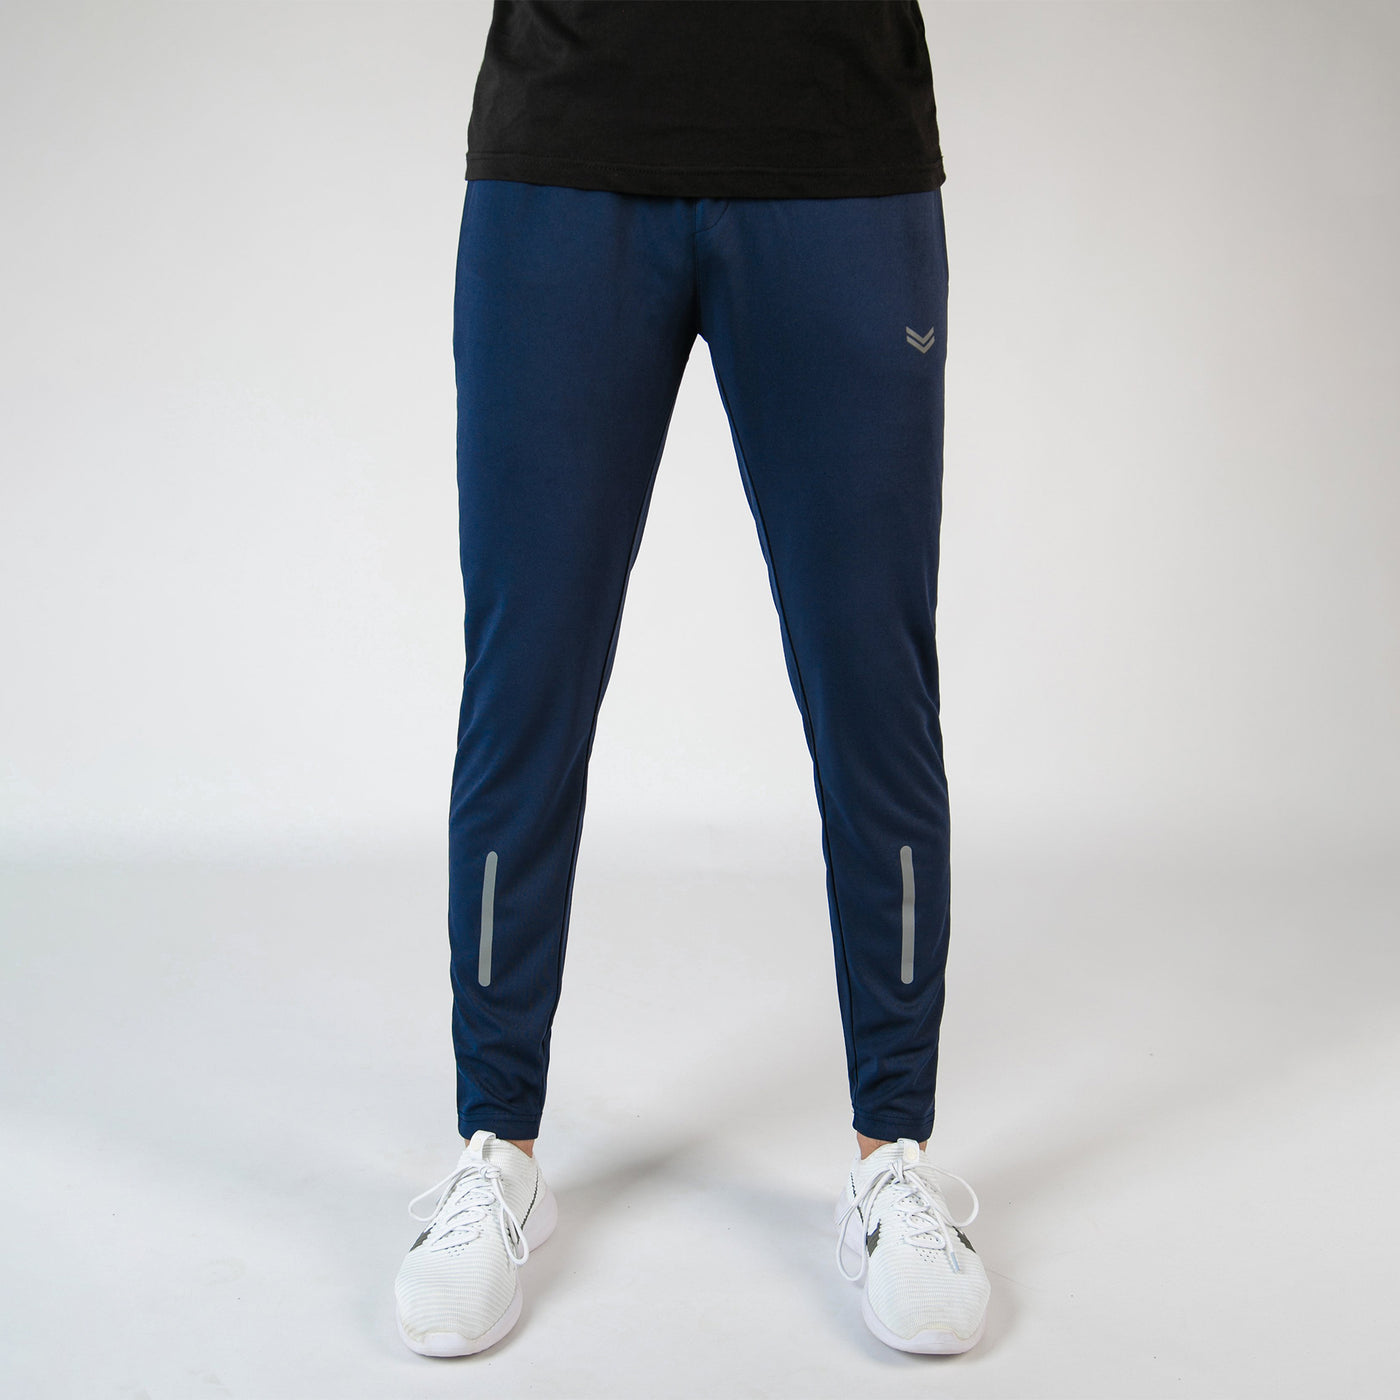 Navy Quick Dry Bottoms With Reflective Detailing